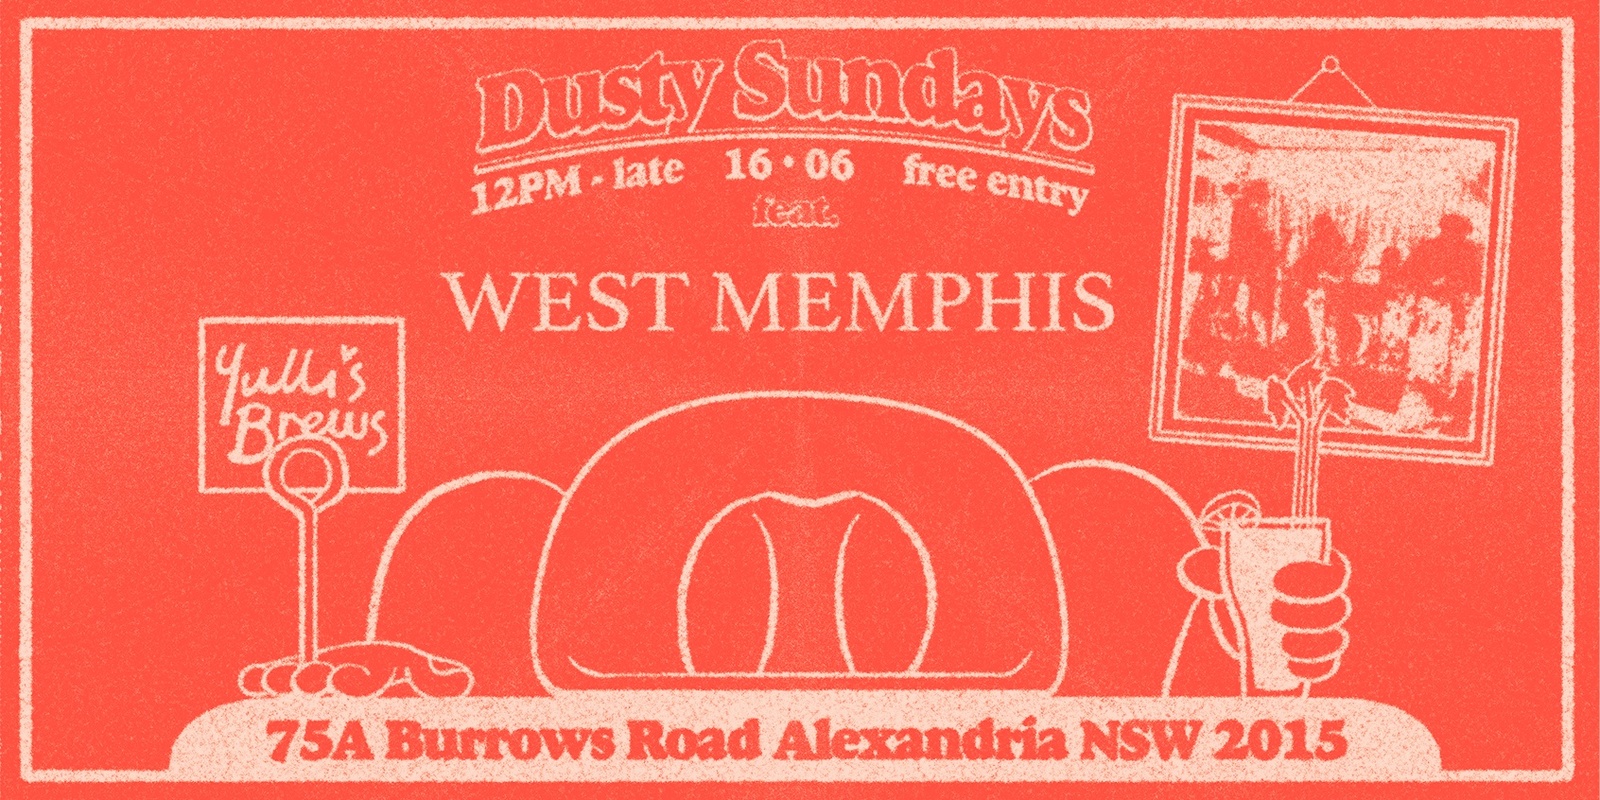 Banner image for DUSTY SUNDAYS - West Memphis